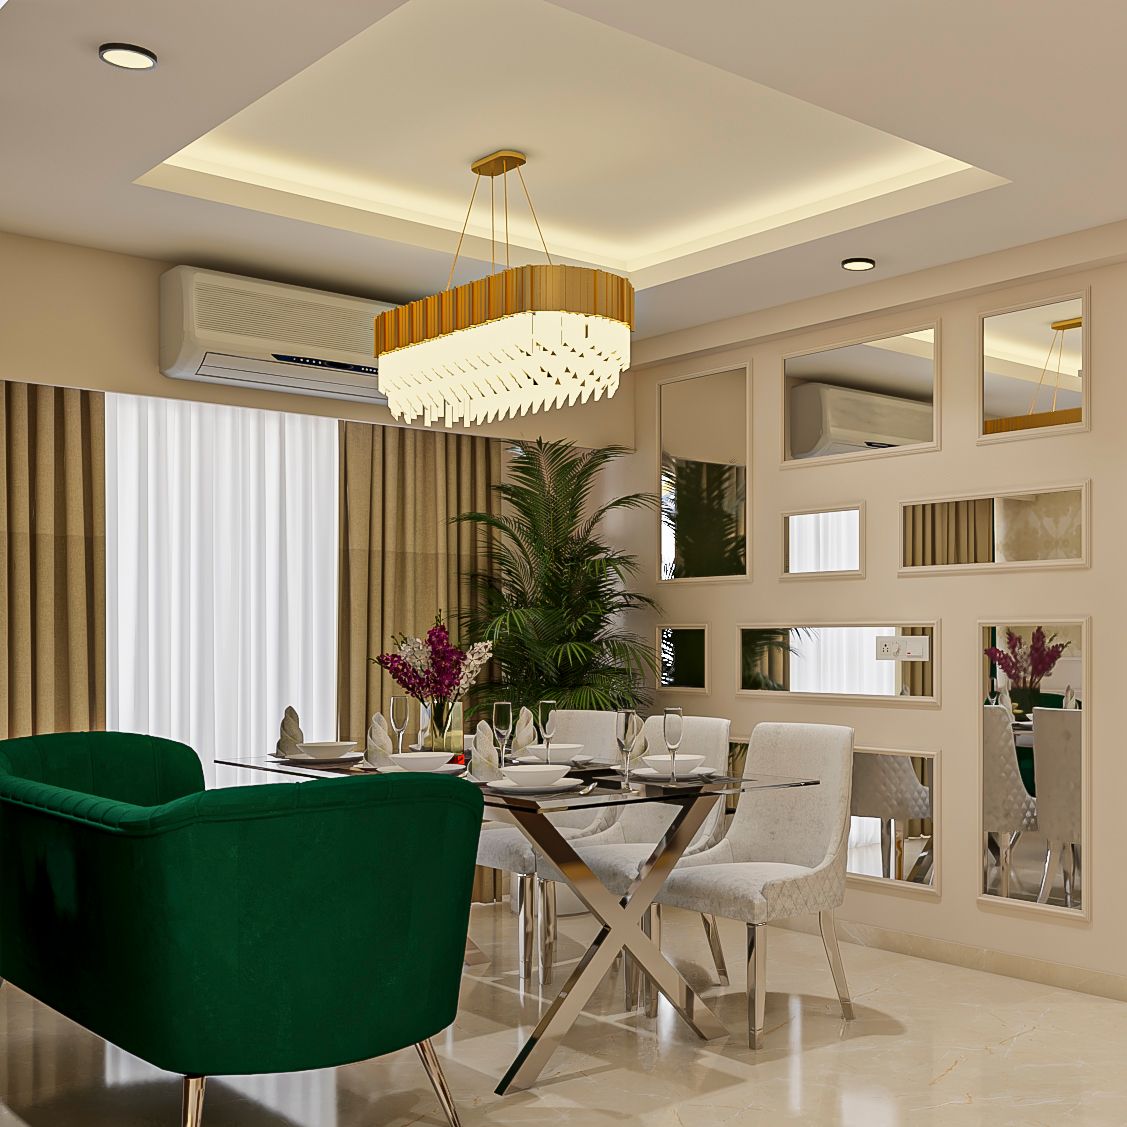 Contemporary White Square Peripheral Ceiling Design For Dining Room